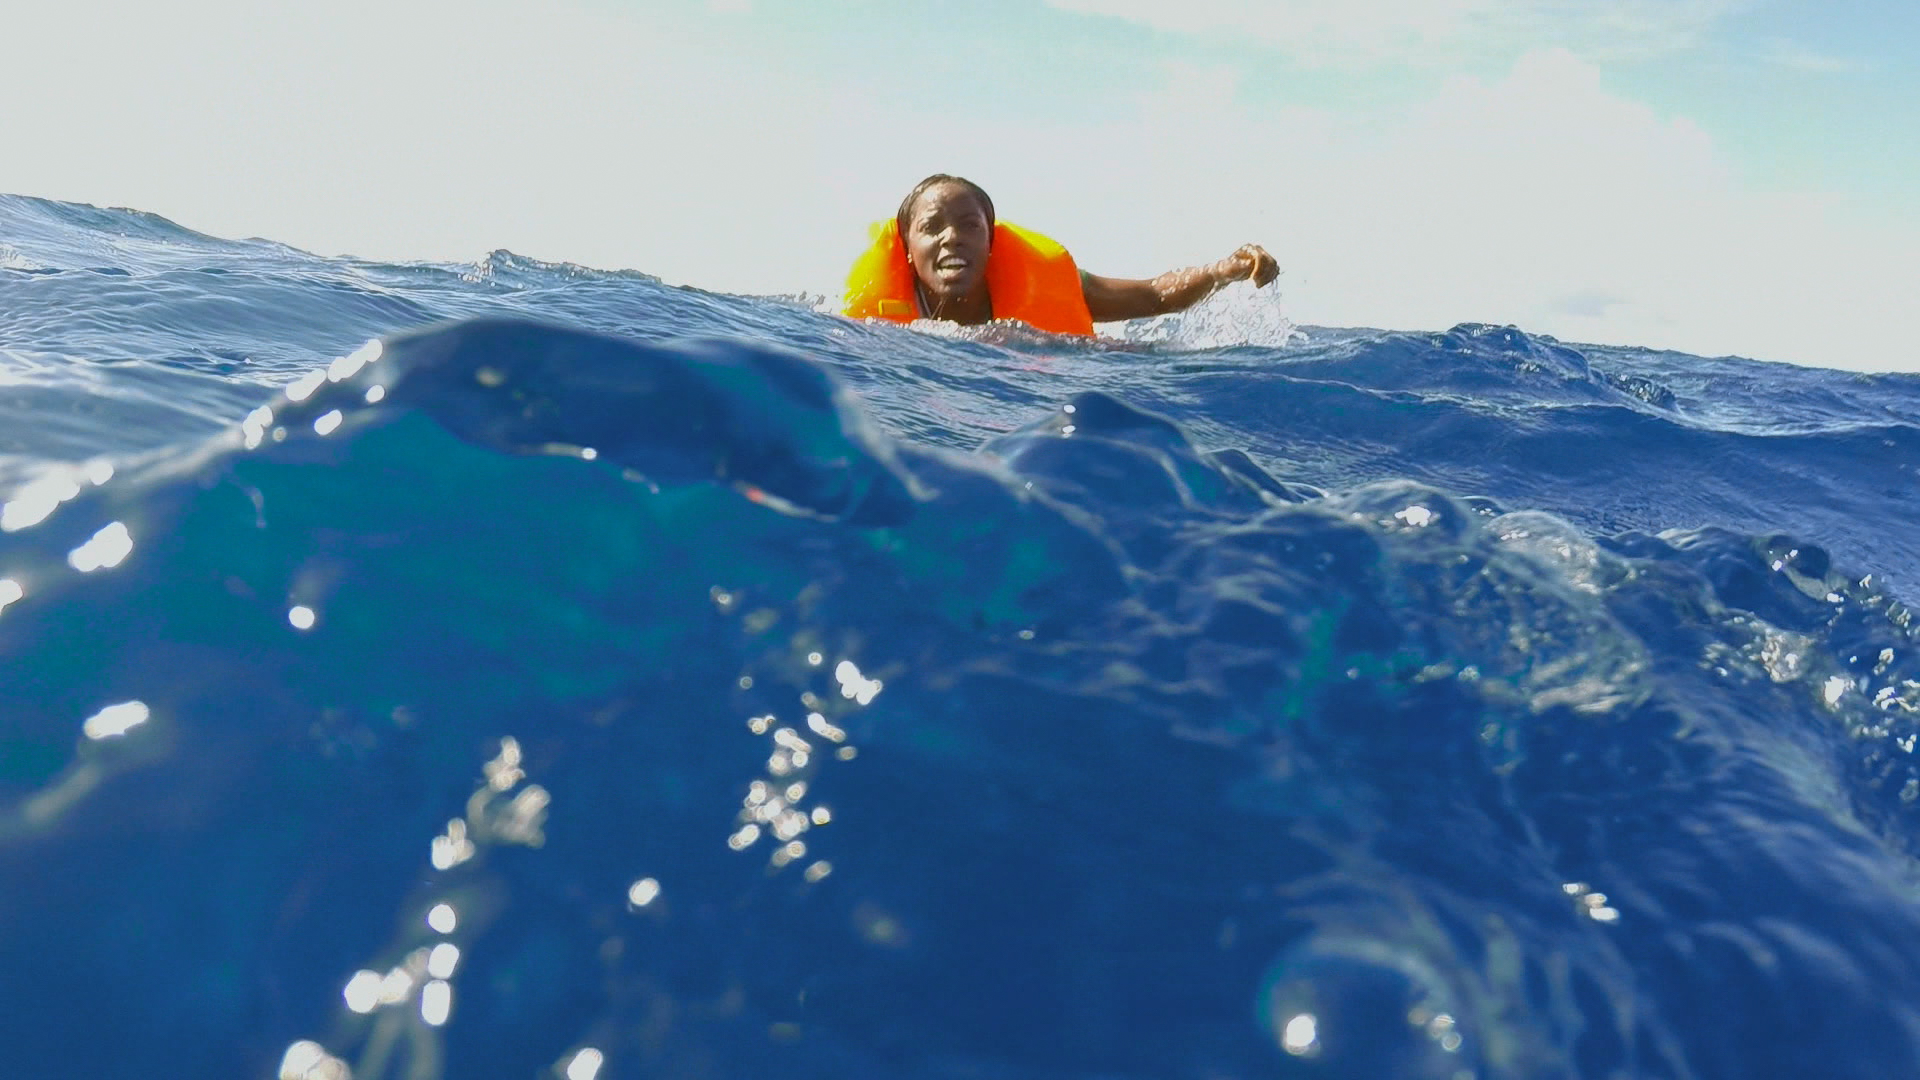 Out in the middle of the Caribbean Ocean, Janeshia Adams-Ginyard fights to survive on National Geographic Channel's 